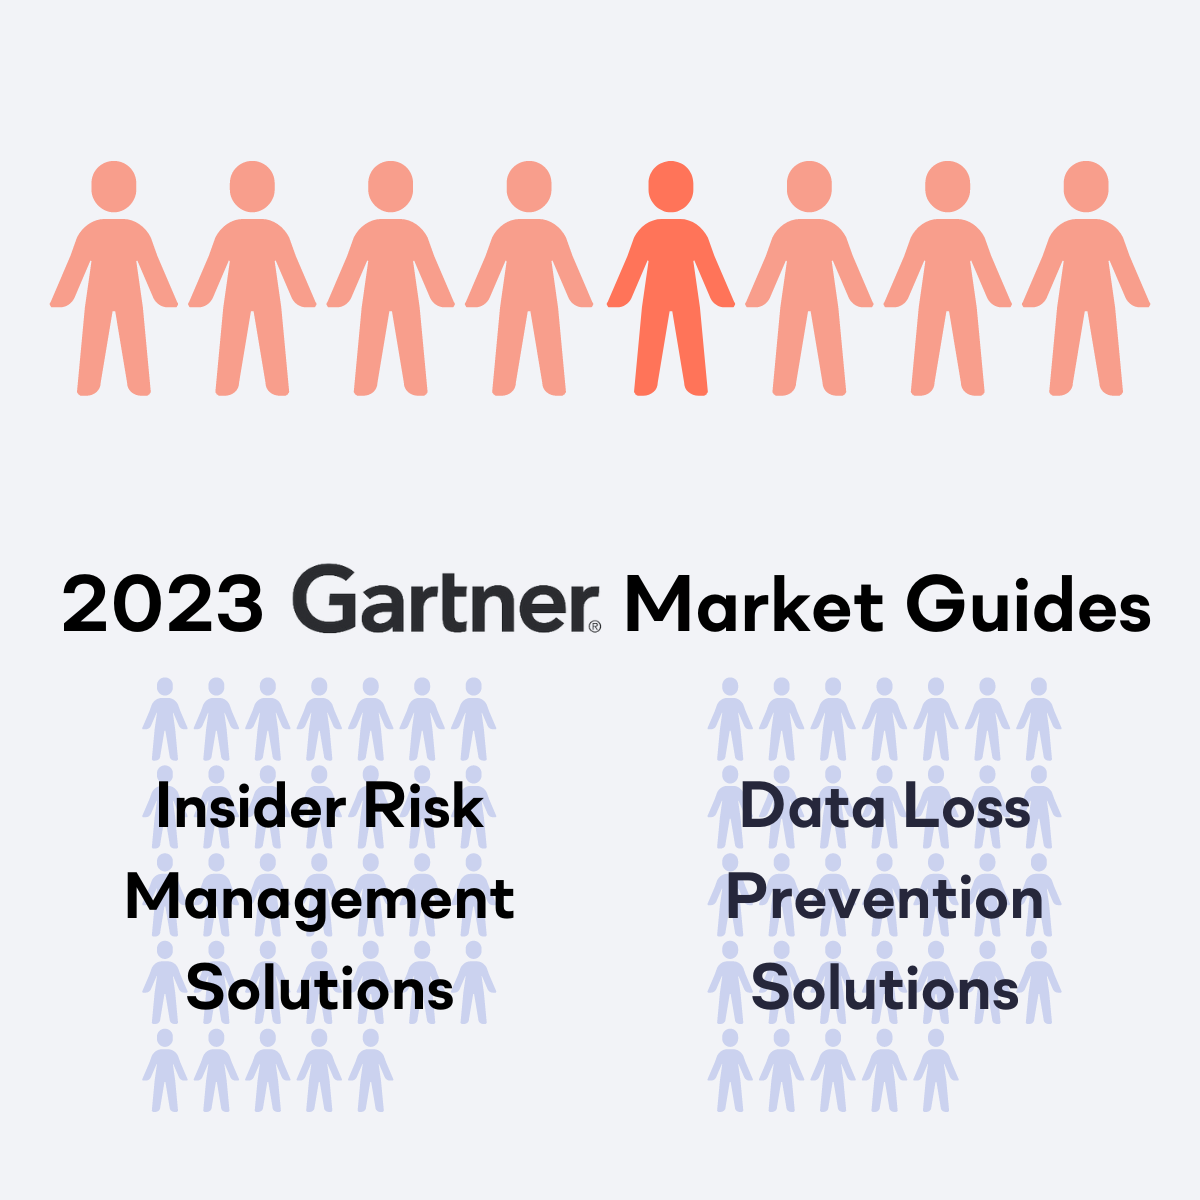 8 companies were named in the DLP and IRM market guide reports from Gartner in 2023 including Next